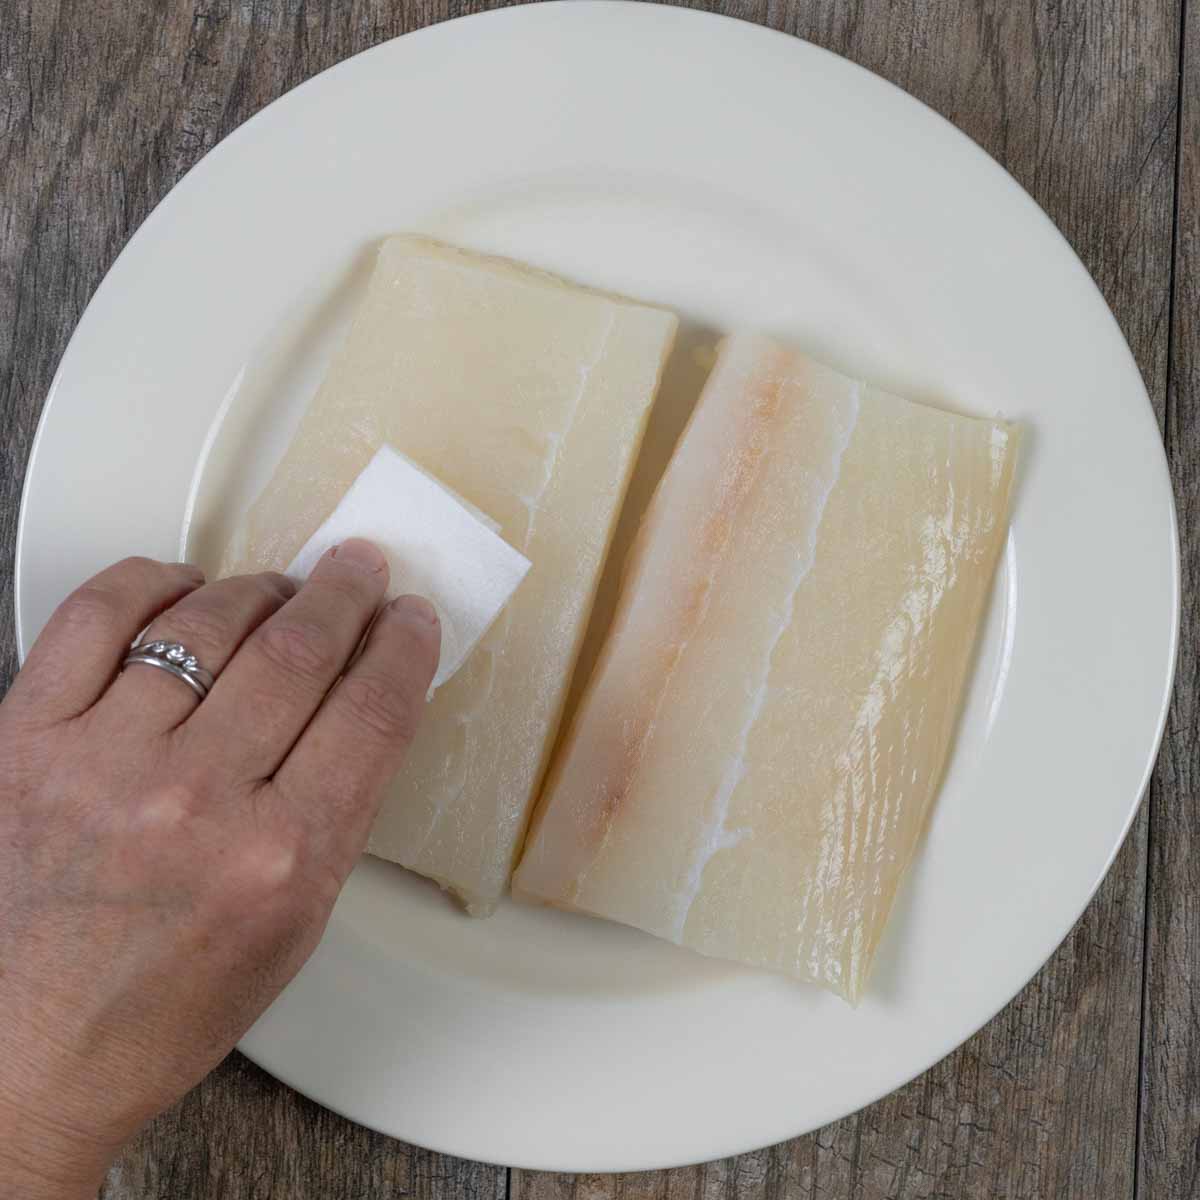 Filets of halibut on a white plate with a person's hand patting dry with a paper towel.